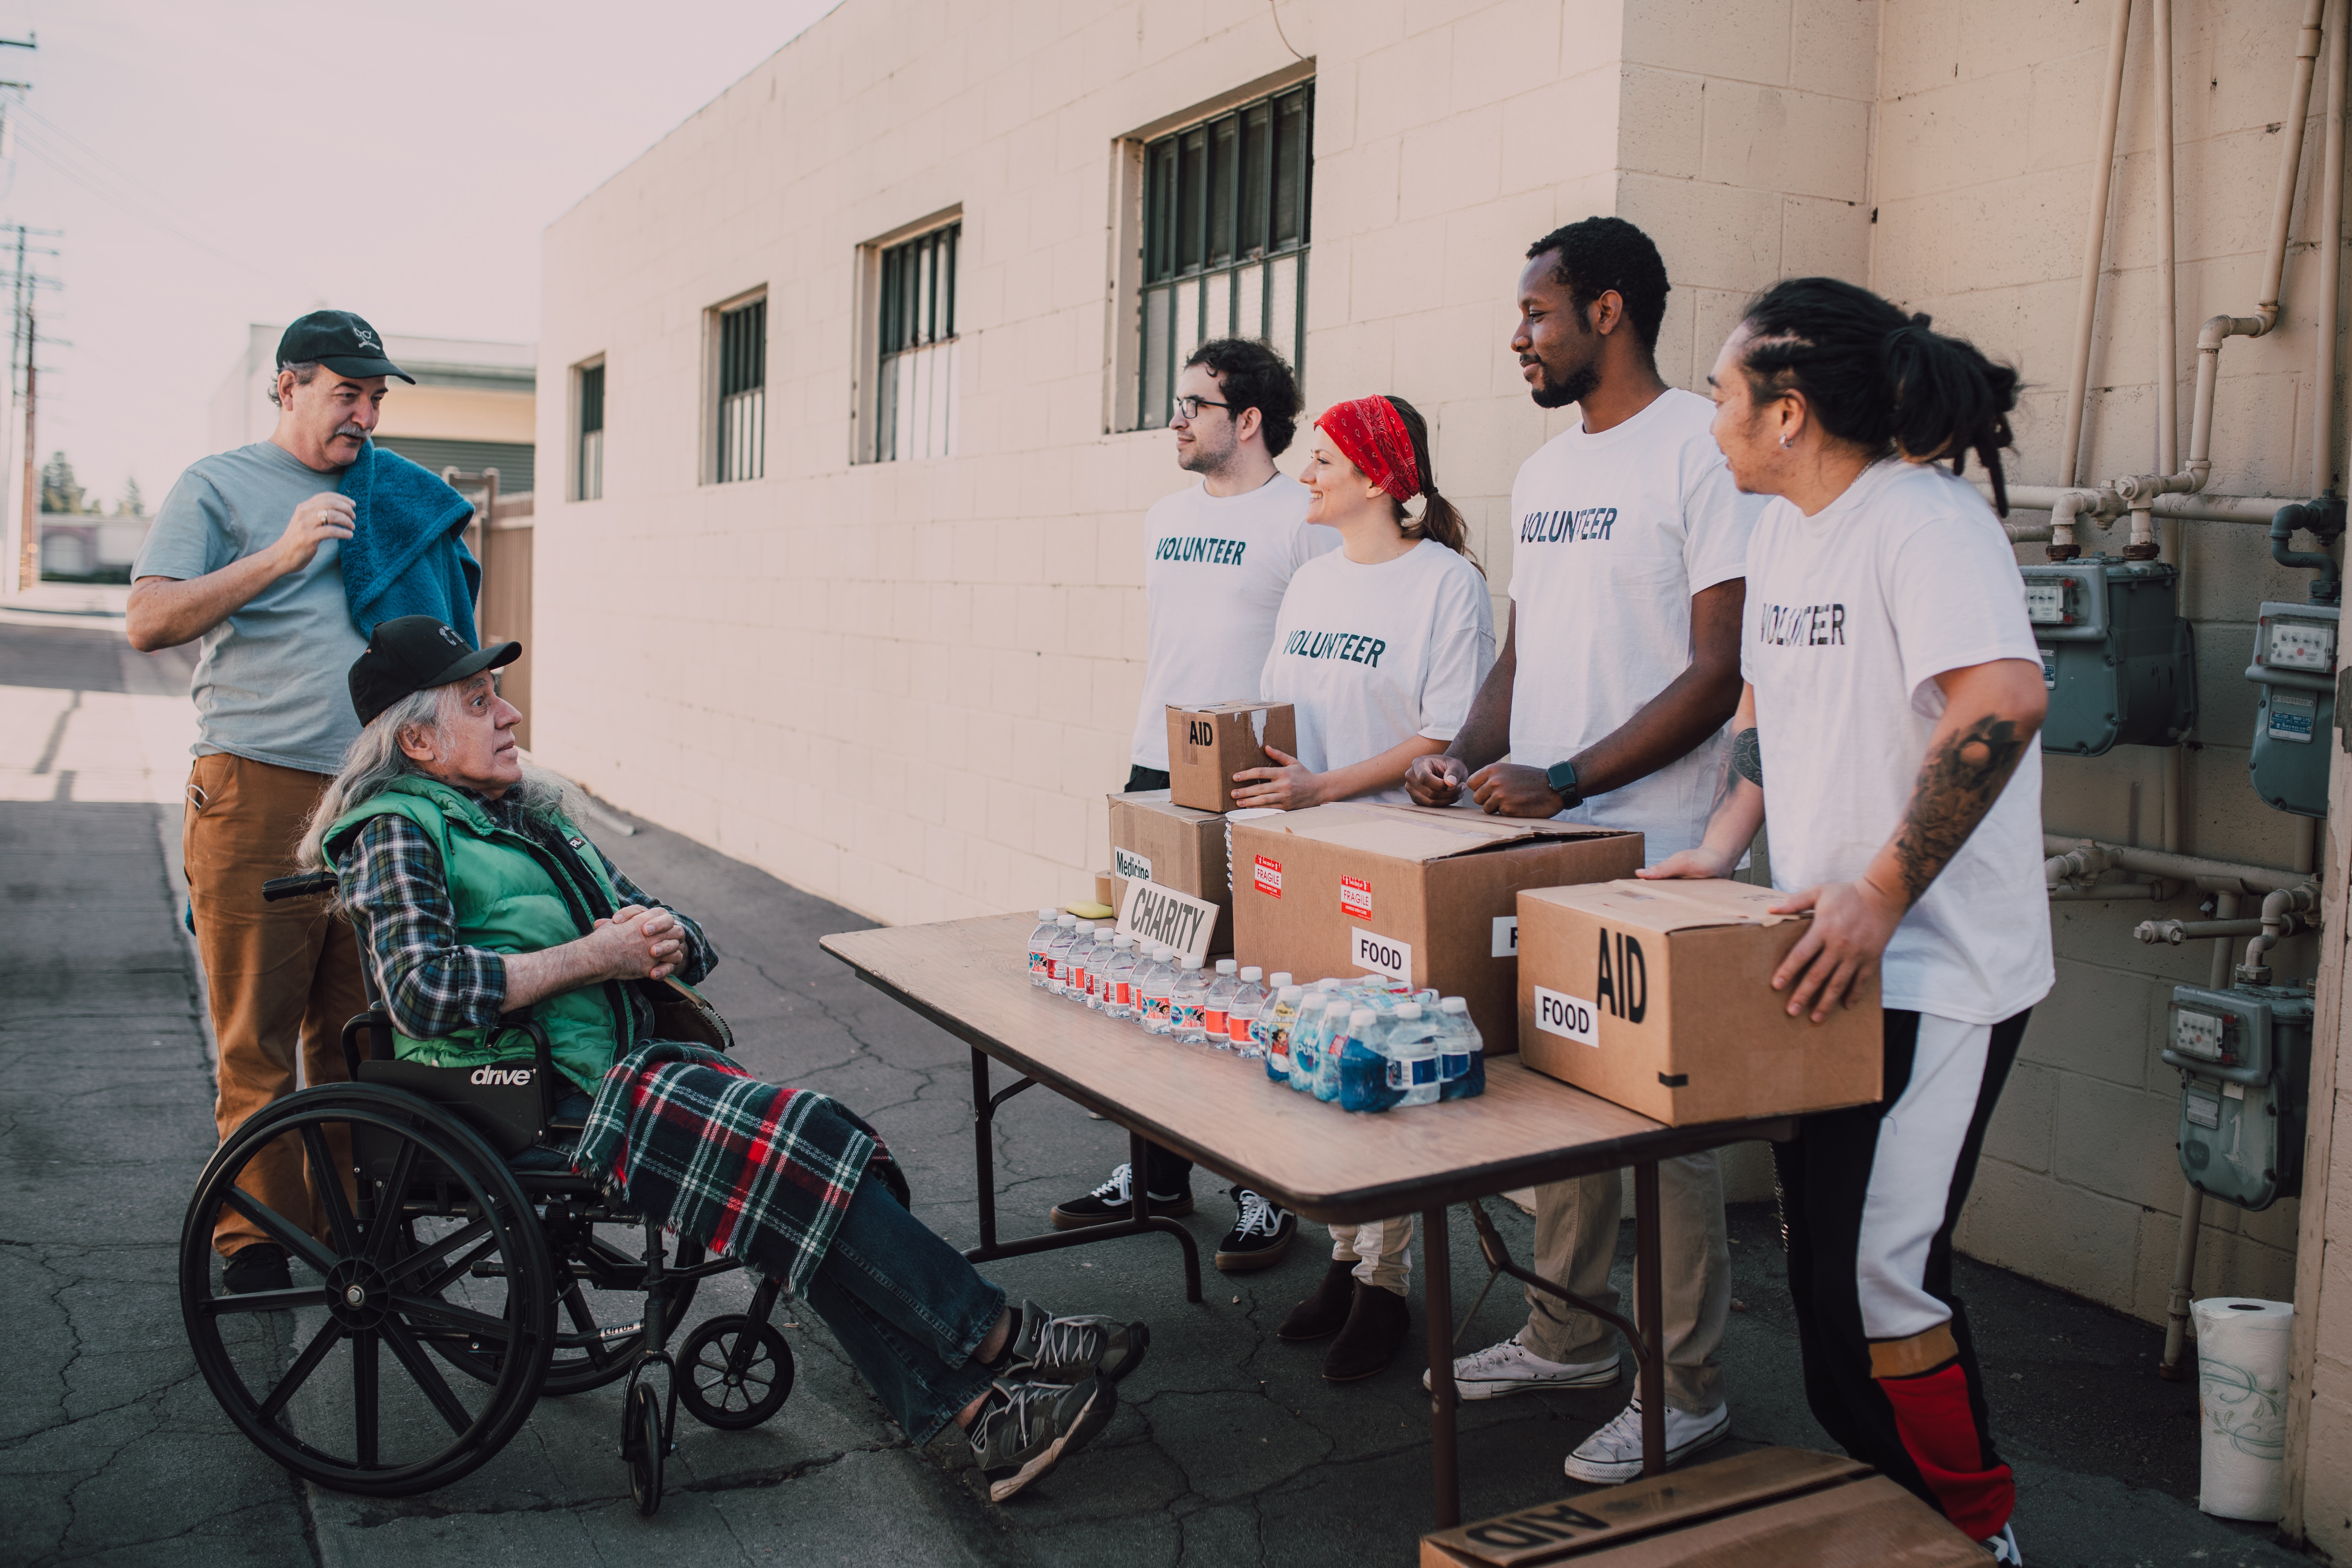 Photo by RDNE Stock project: https://www.pexels.com/photo/volunteers-assisting-an-old-man-on-a-wheelchair-6646914/